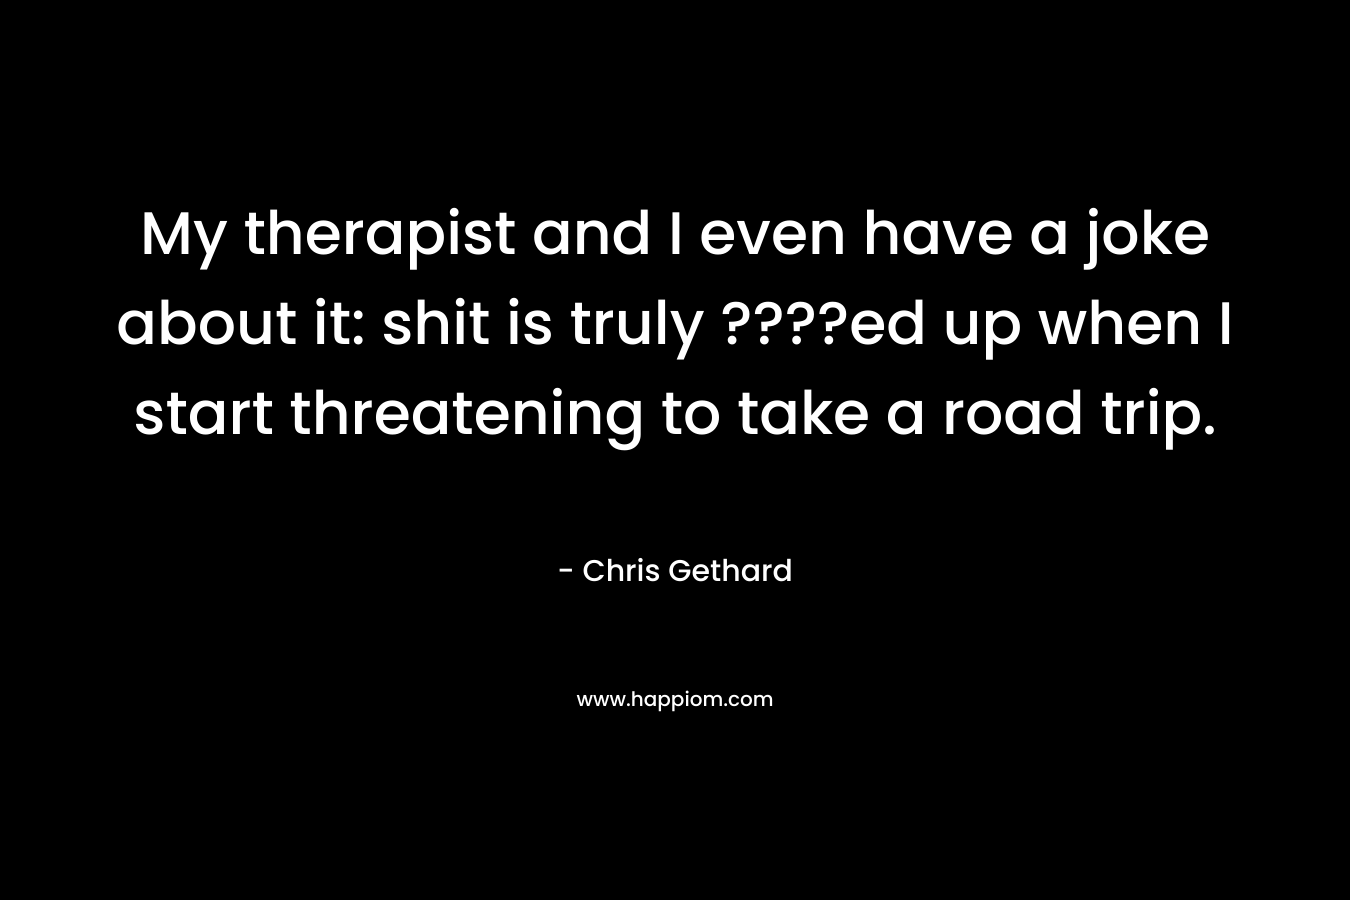 My therapist and I even have a joke about it: shit is truly ????ed up when I start threatening to take a road trip. – Chris Gethard